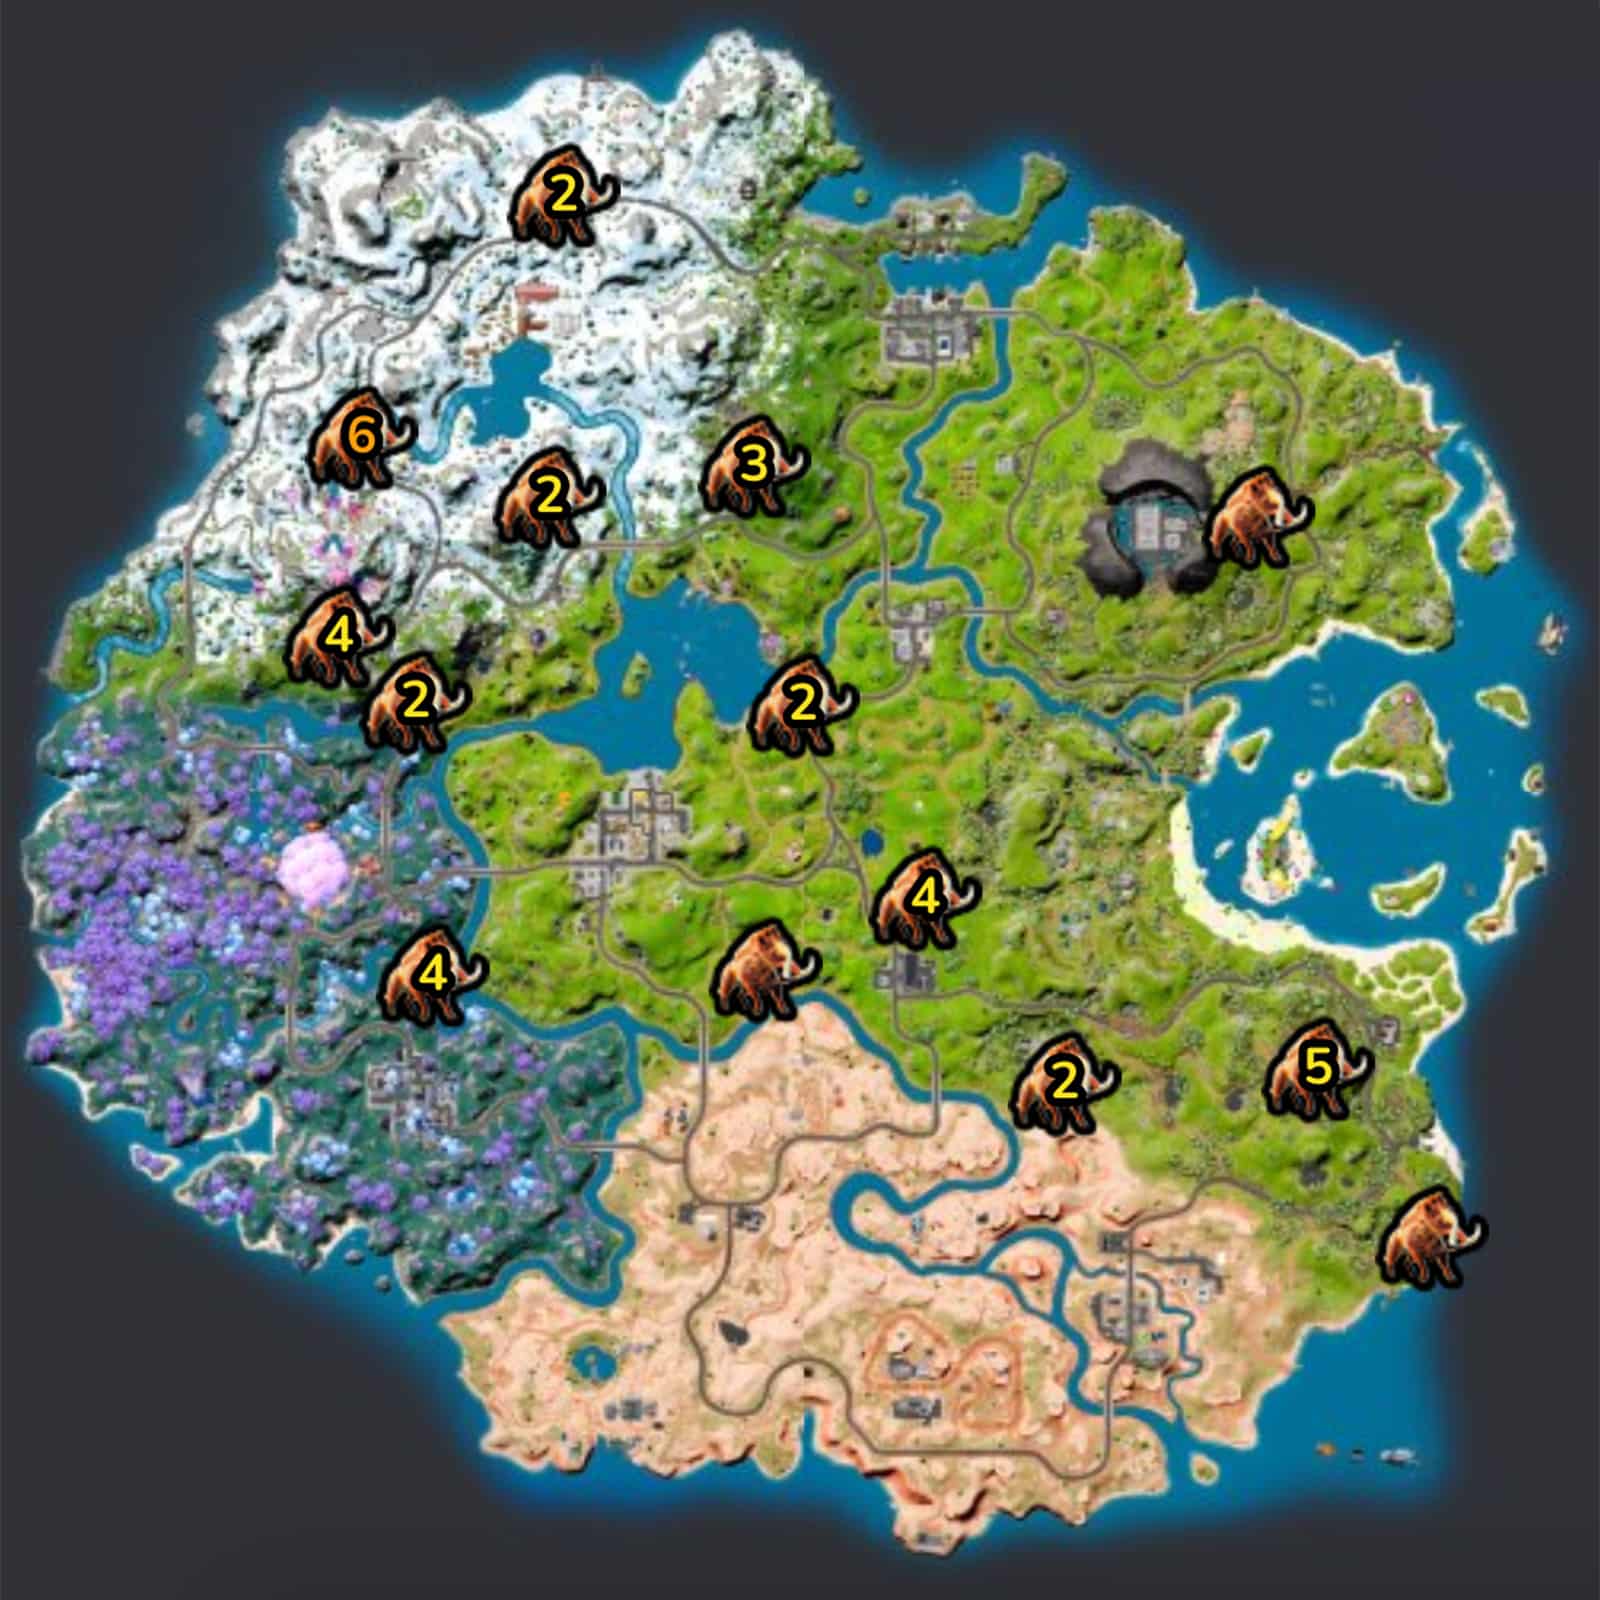 Boar locations on the Fortnite map